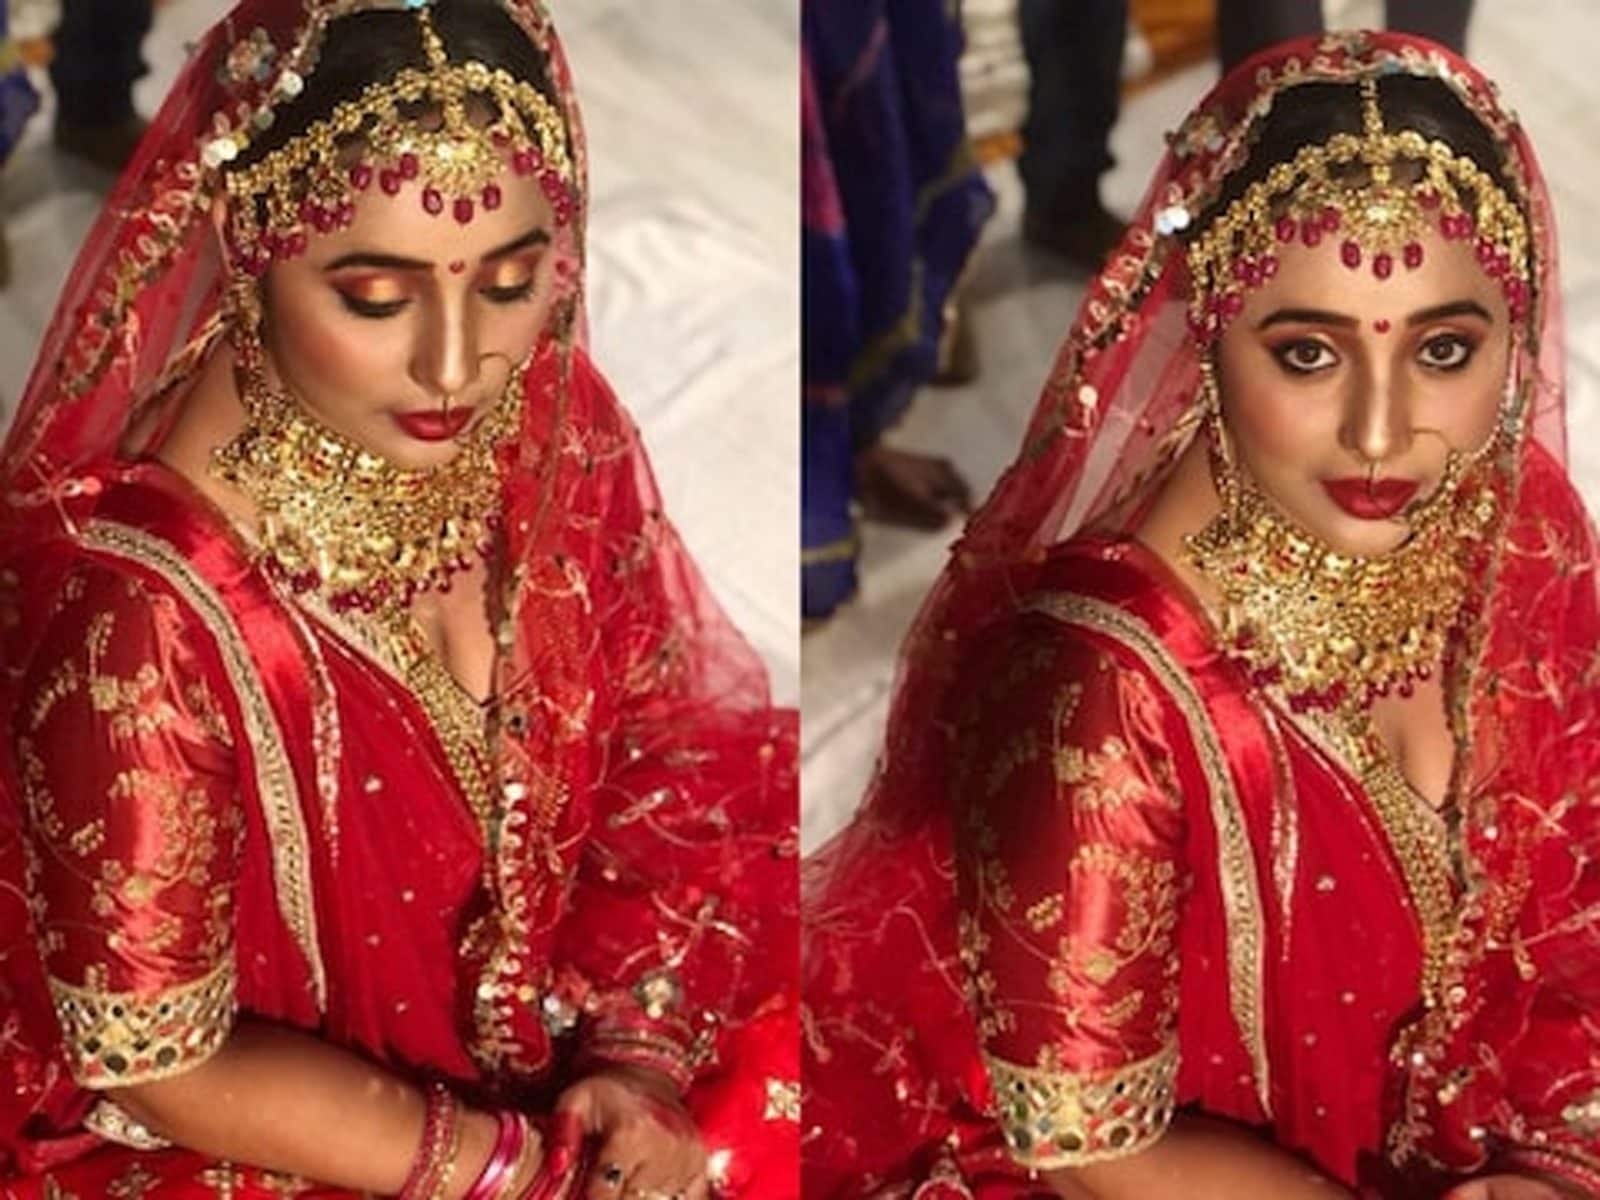 Rani Chatterjee Video Sxc Hd Xxx - Rani Chatterjee Shares Her Bridal Look From Her Upcoming Movie, Fans Go Wow  - News18